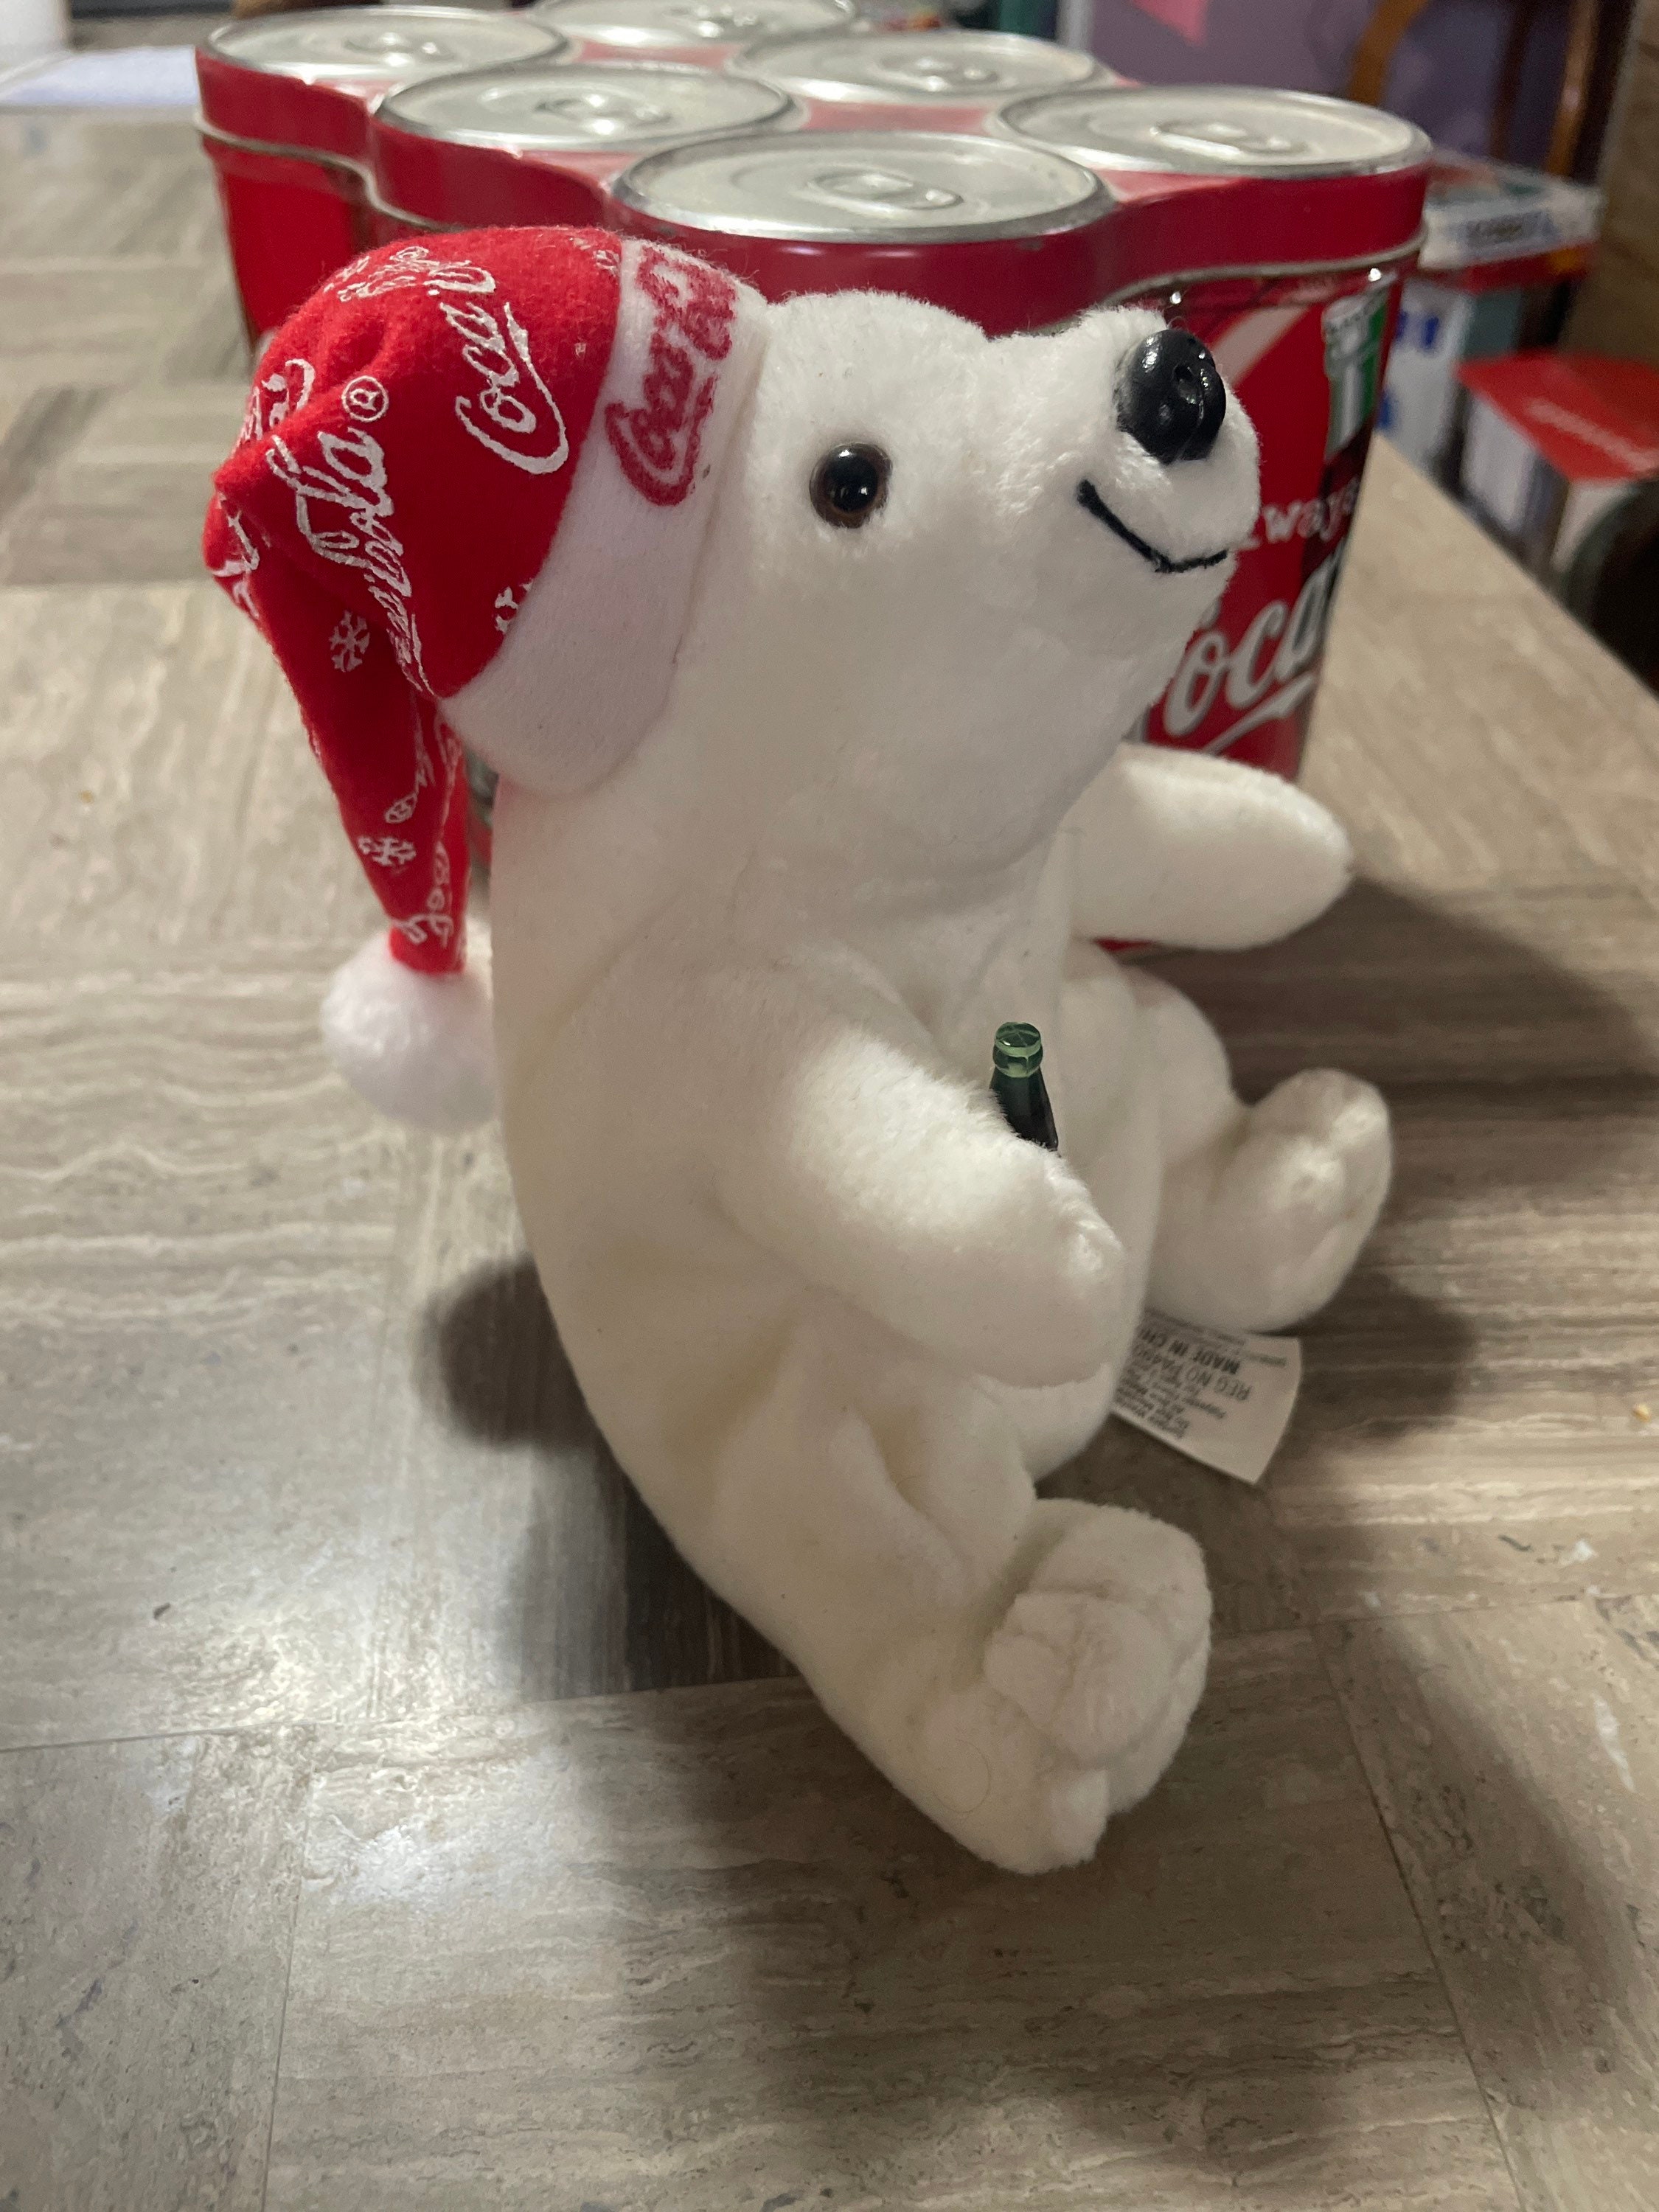 Polar Bear Stuffed Animal 17 Inches Long with Zipper Pouch, 1998